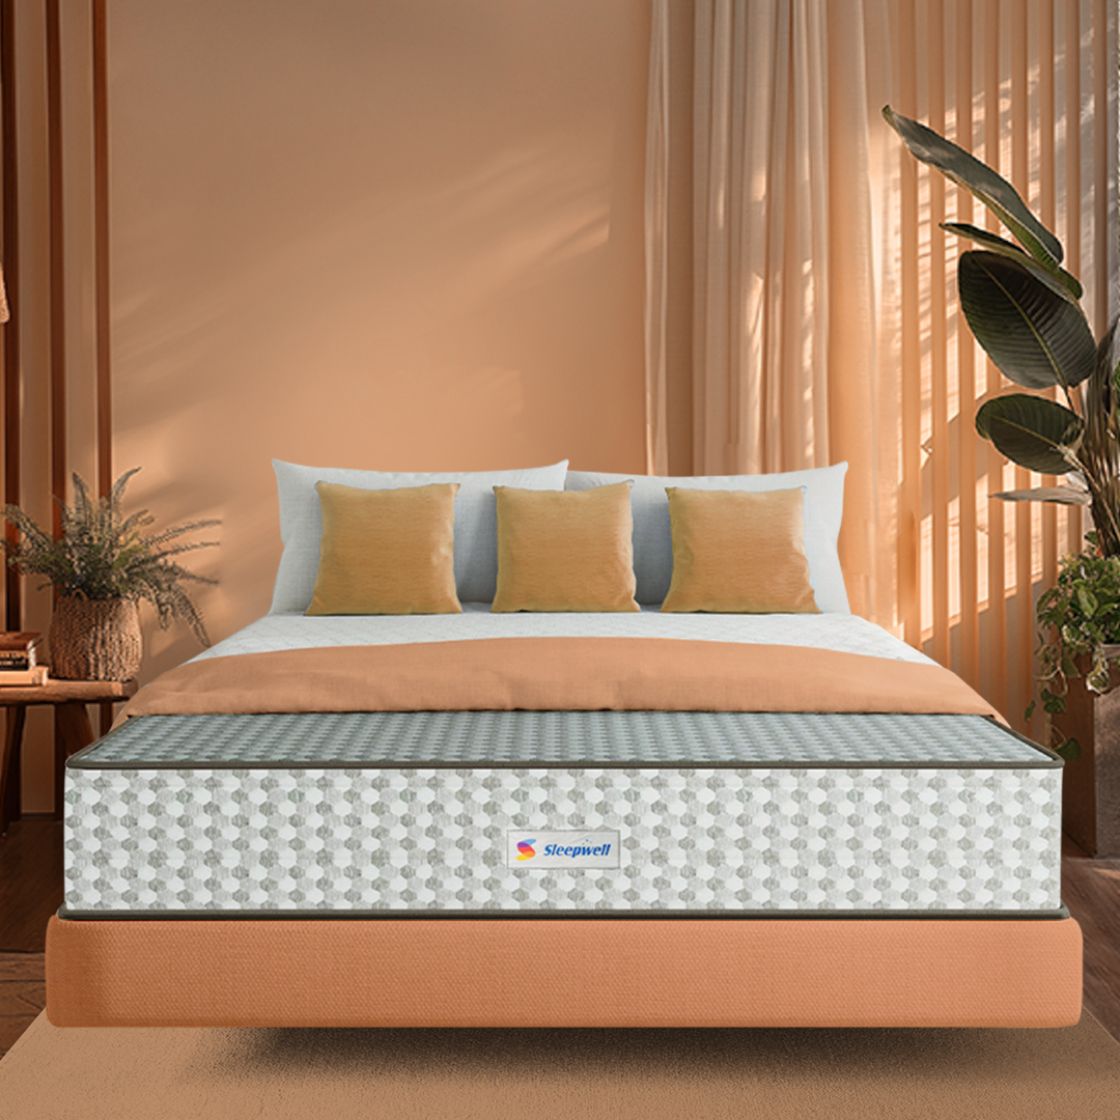 Sleepwell Dual PRO Profiled Foam Reversible 8-inch Double Bed Size, Gentle and Firm, Triple Layered Anti Sag Foam Mattress (Grey, 75x48x8)